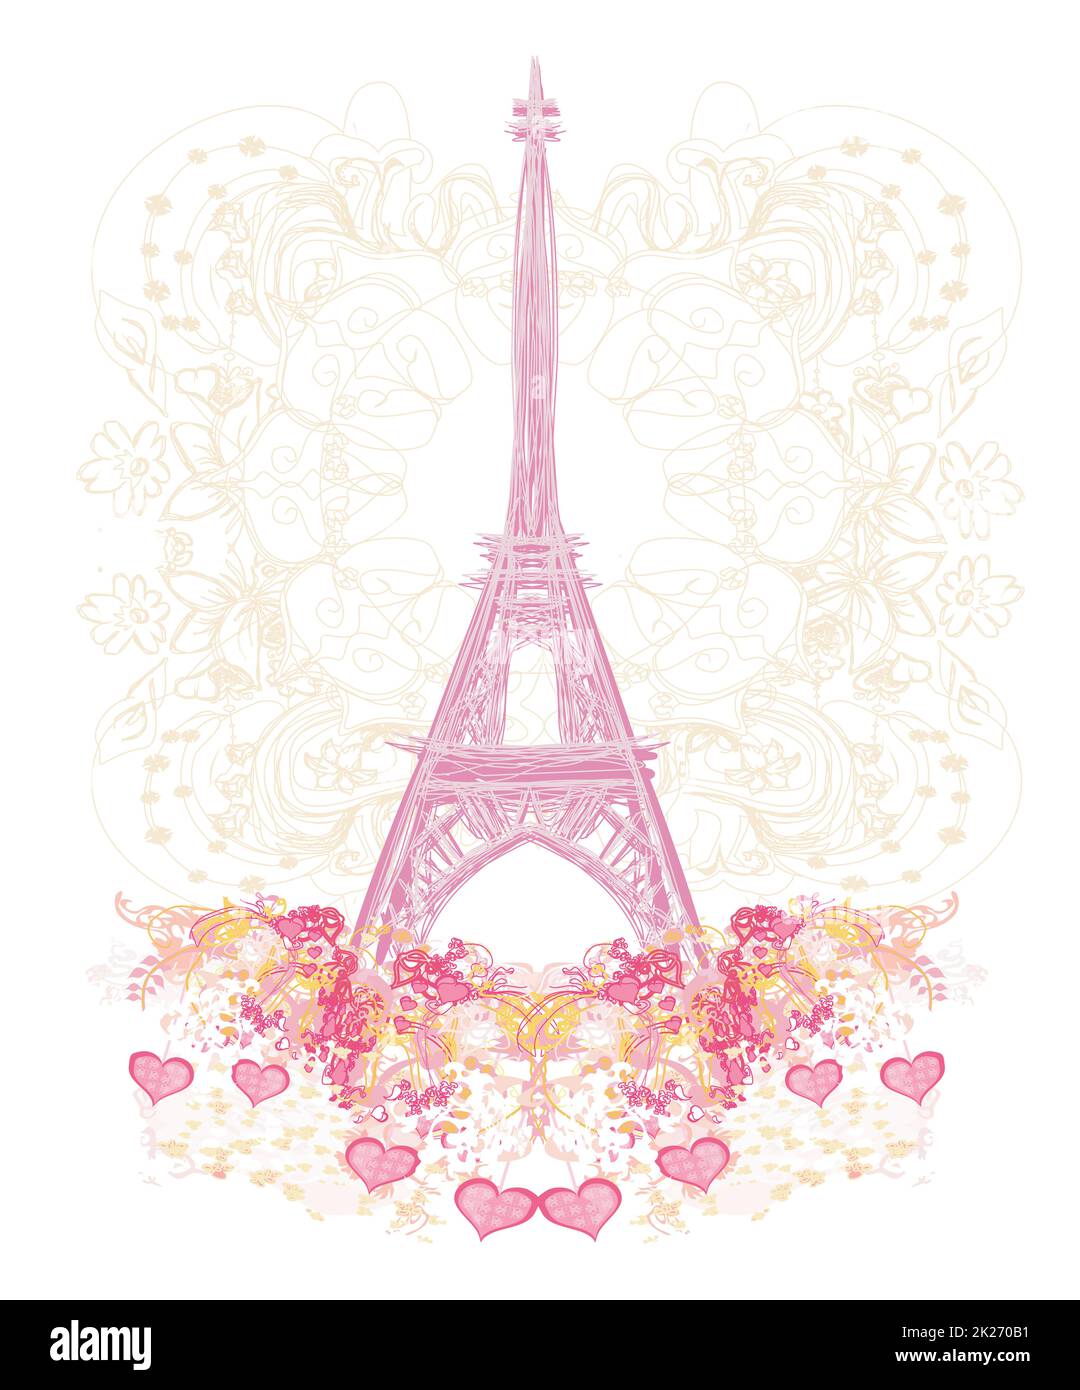 Eiffel tower artistic card, decorative floral background Stock Photo